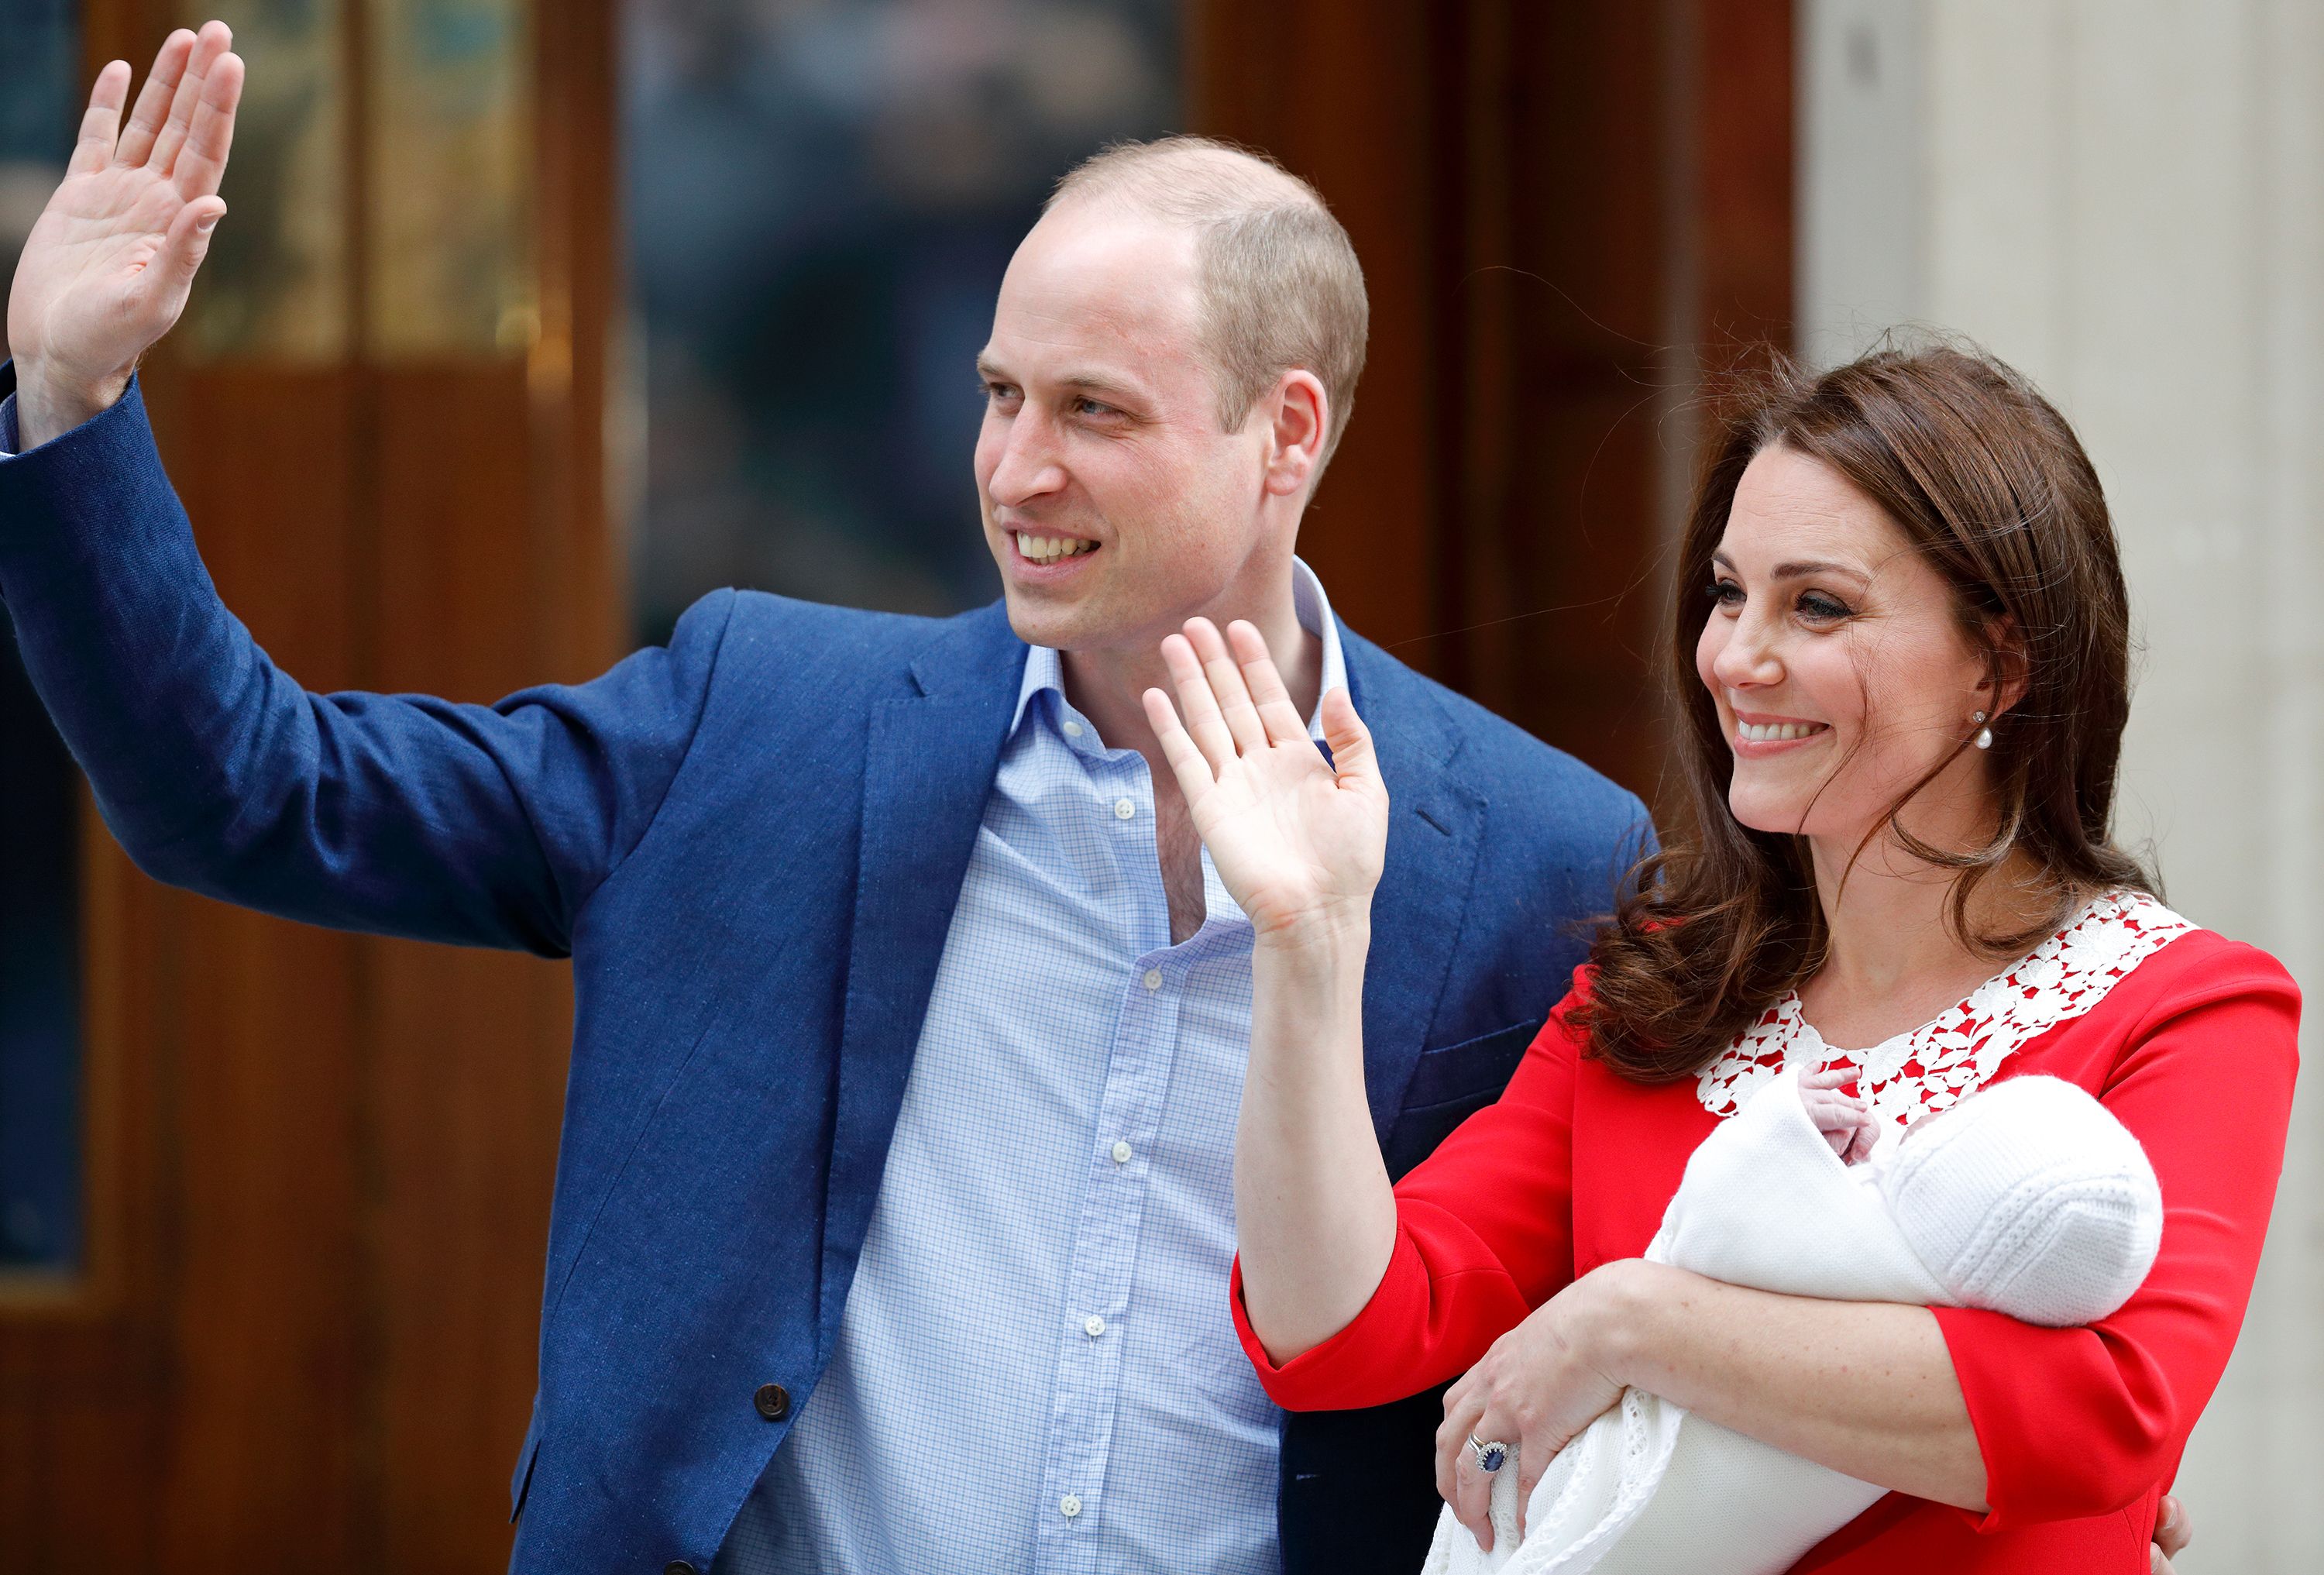 Middleton and Prince William's Royal Baby Number 3's Official Title Will Be Prince or Princess